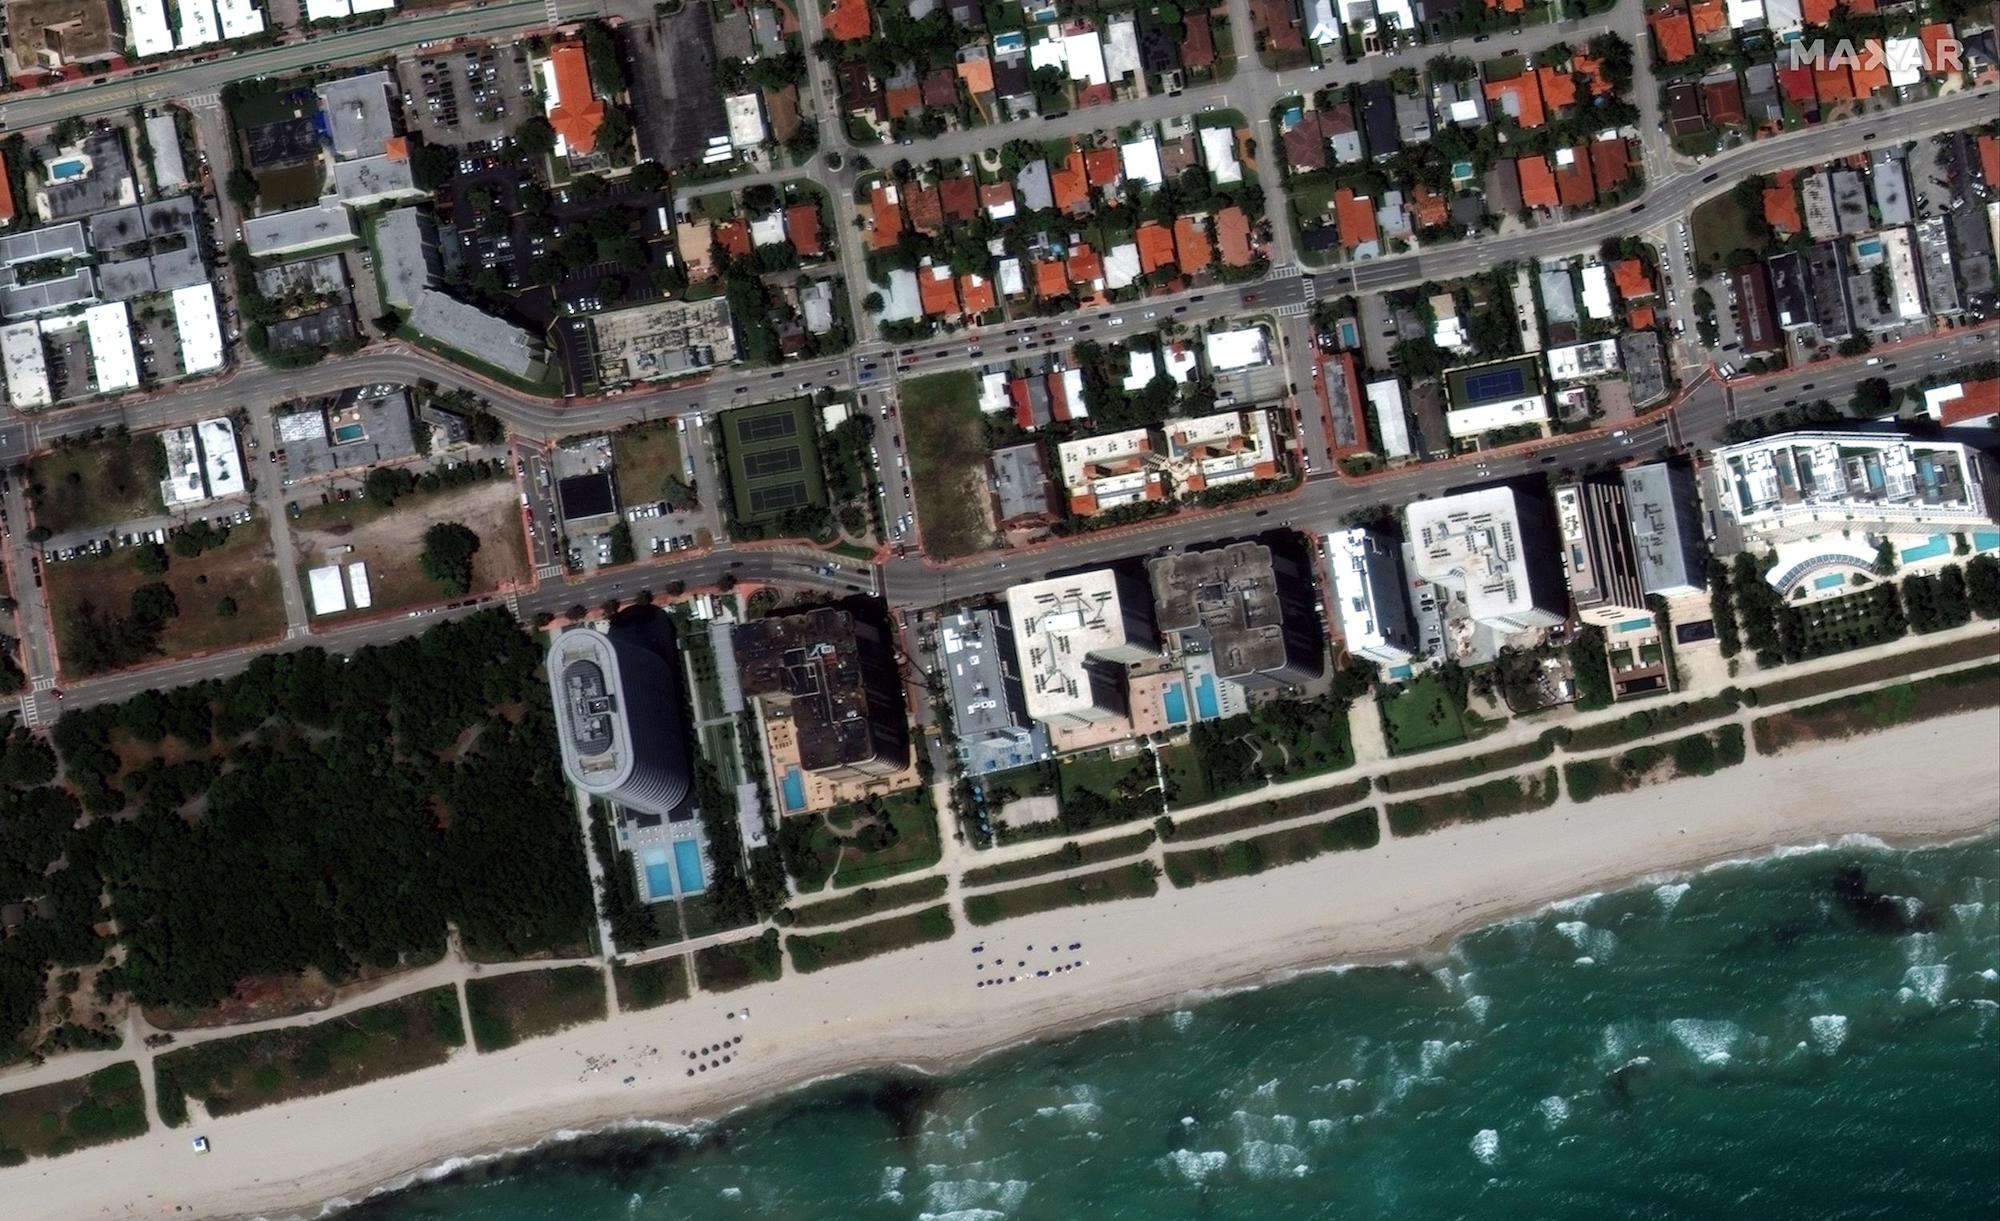 Surfside collapse could turn real estate market into feeding frenzy for coastal developers